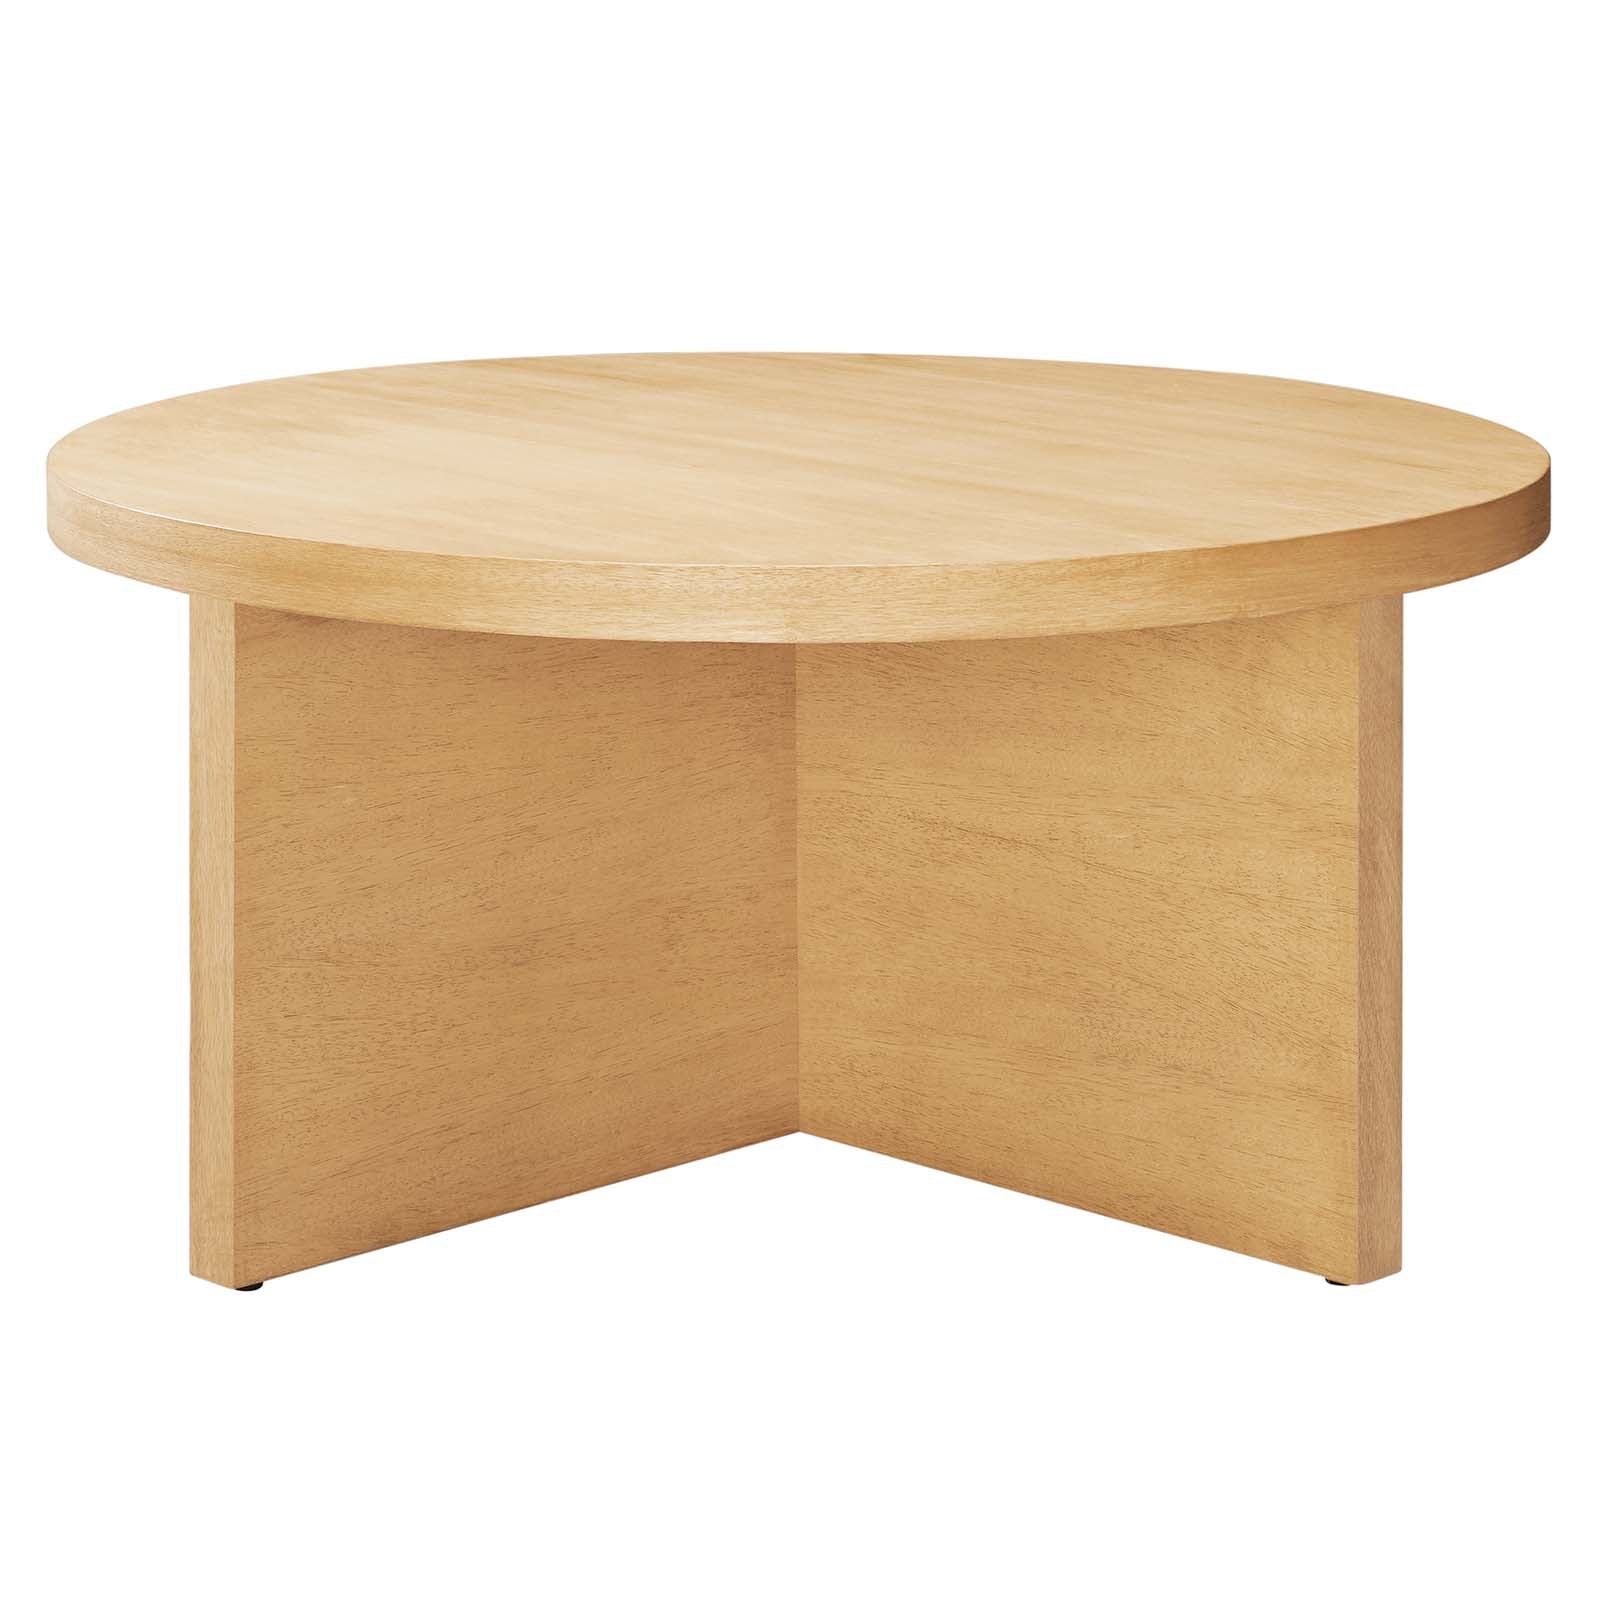 Silas Round Wood Coffee Table